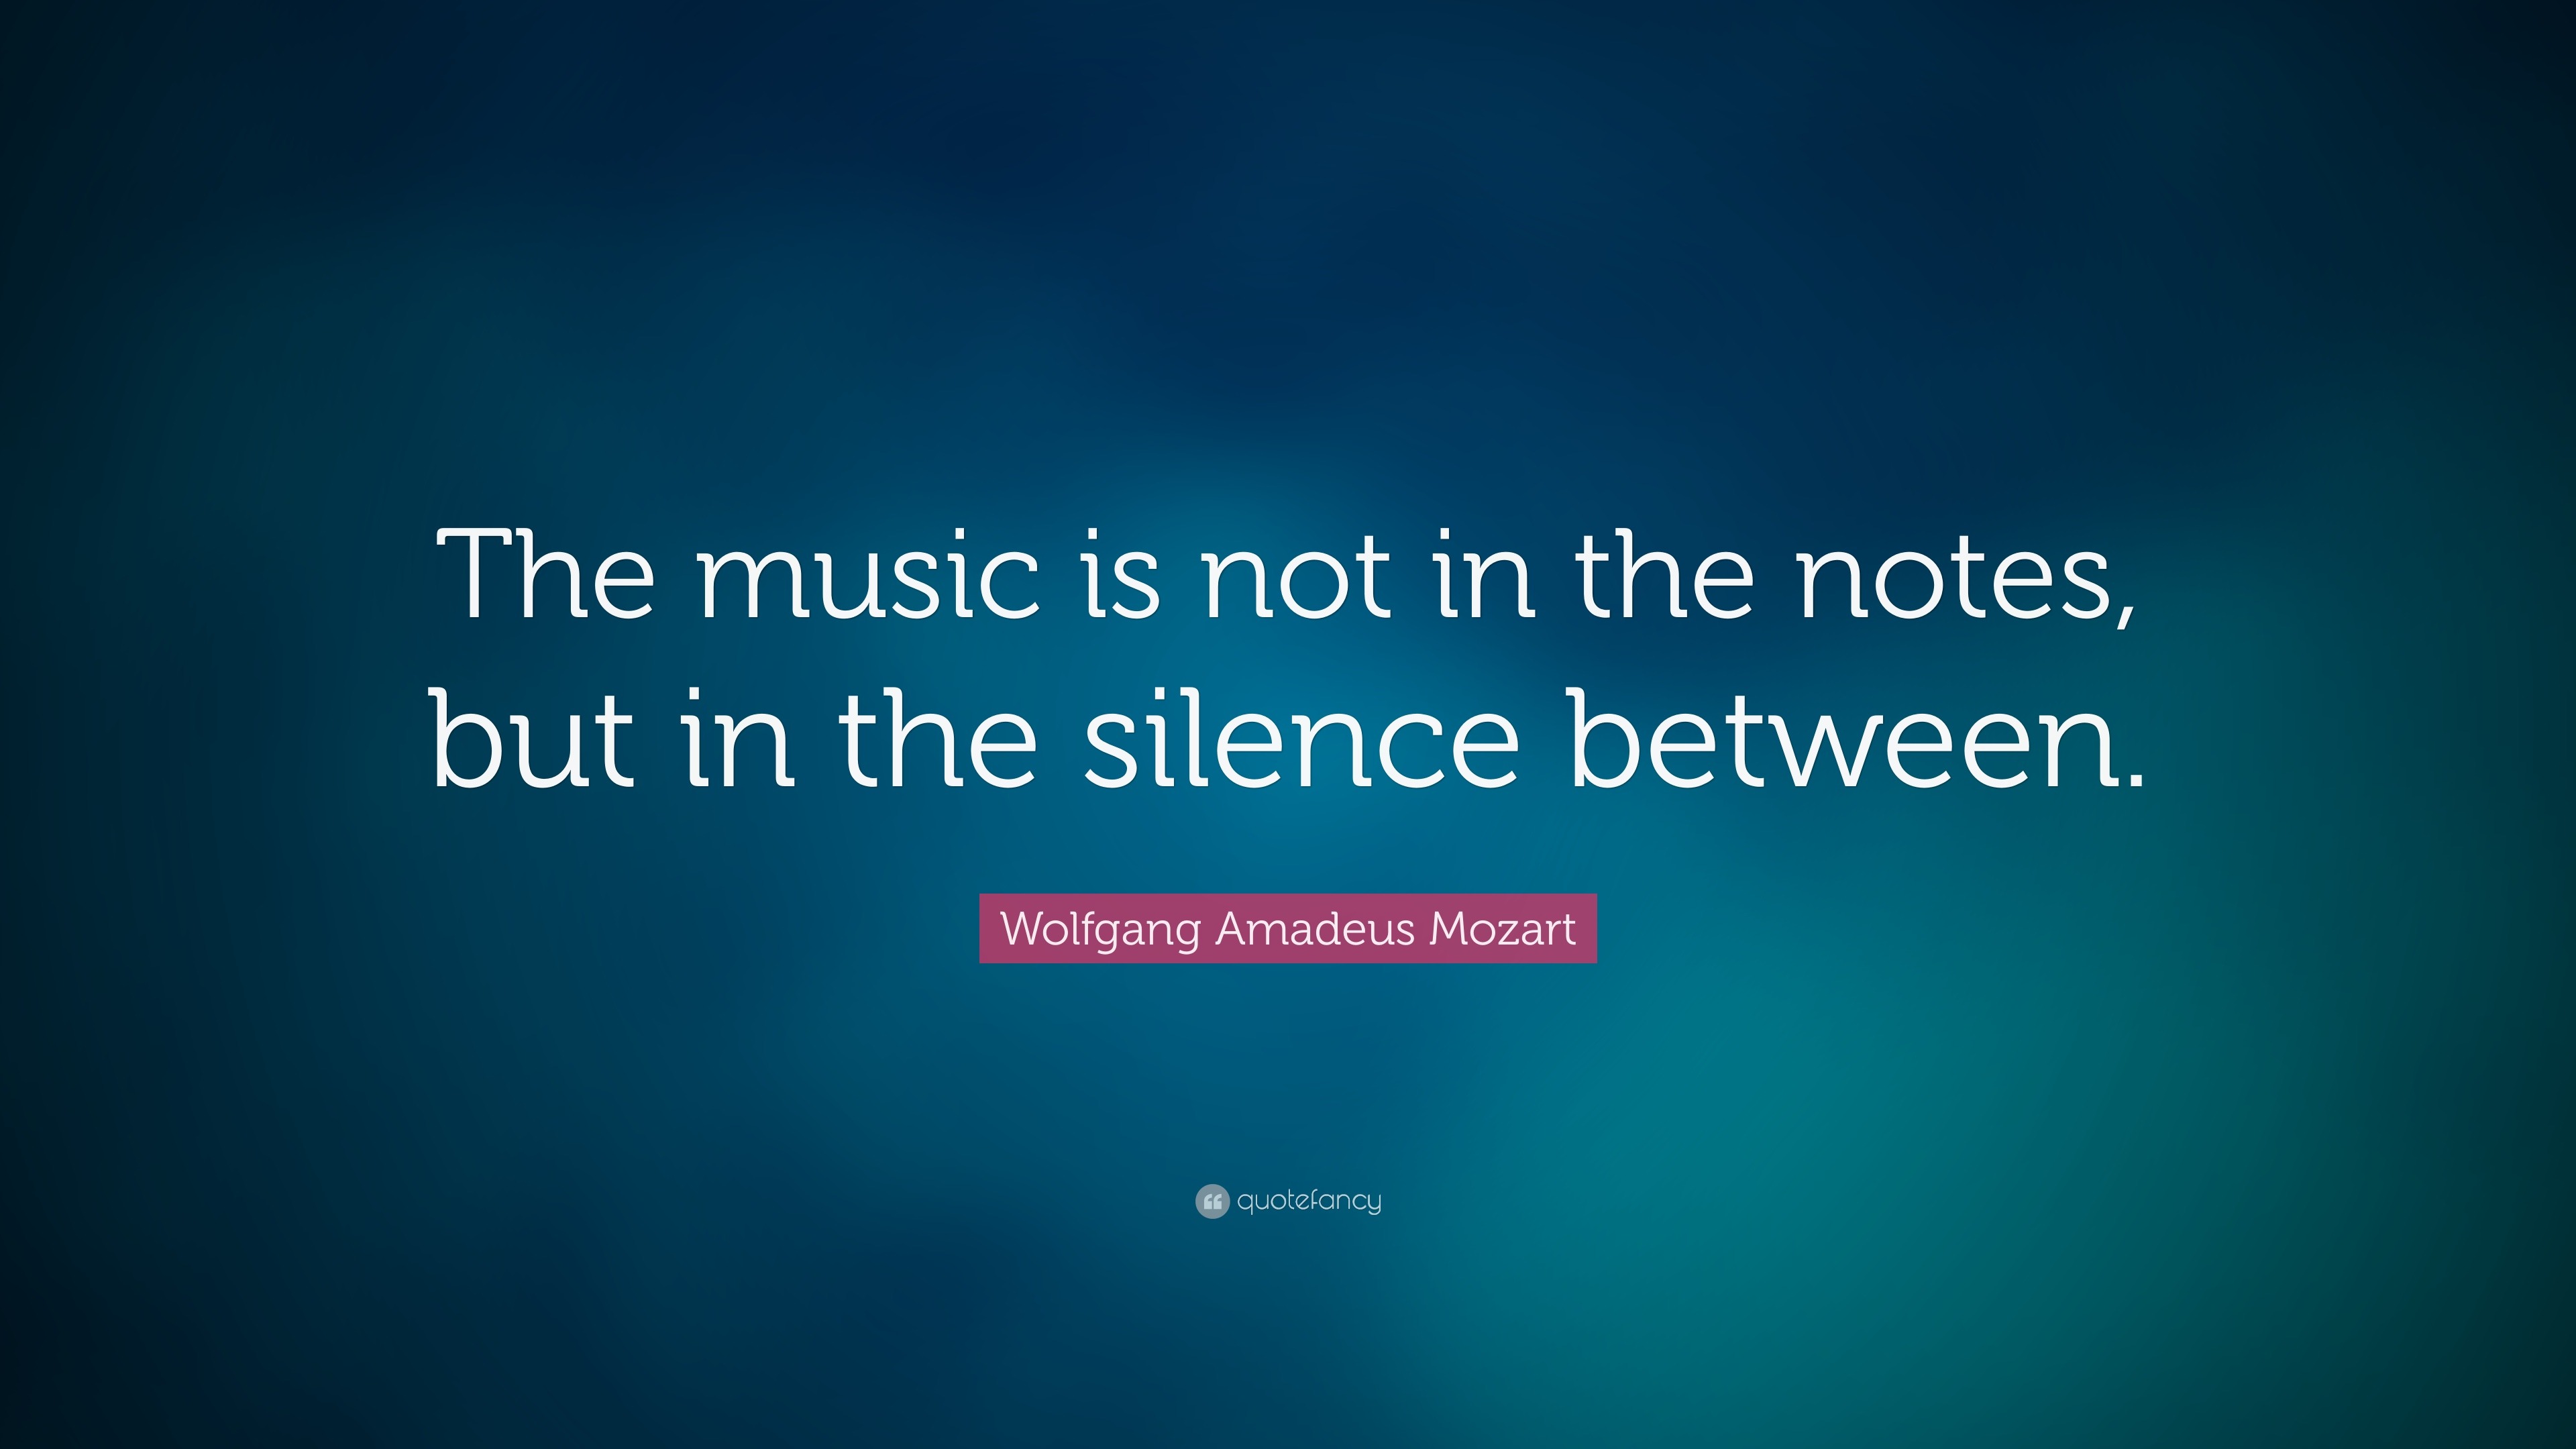 Wolfgang Amadeus Mozart Quote: “The music is not in the notes, but in